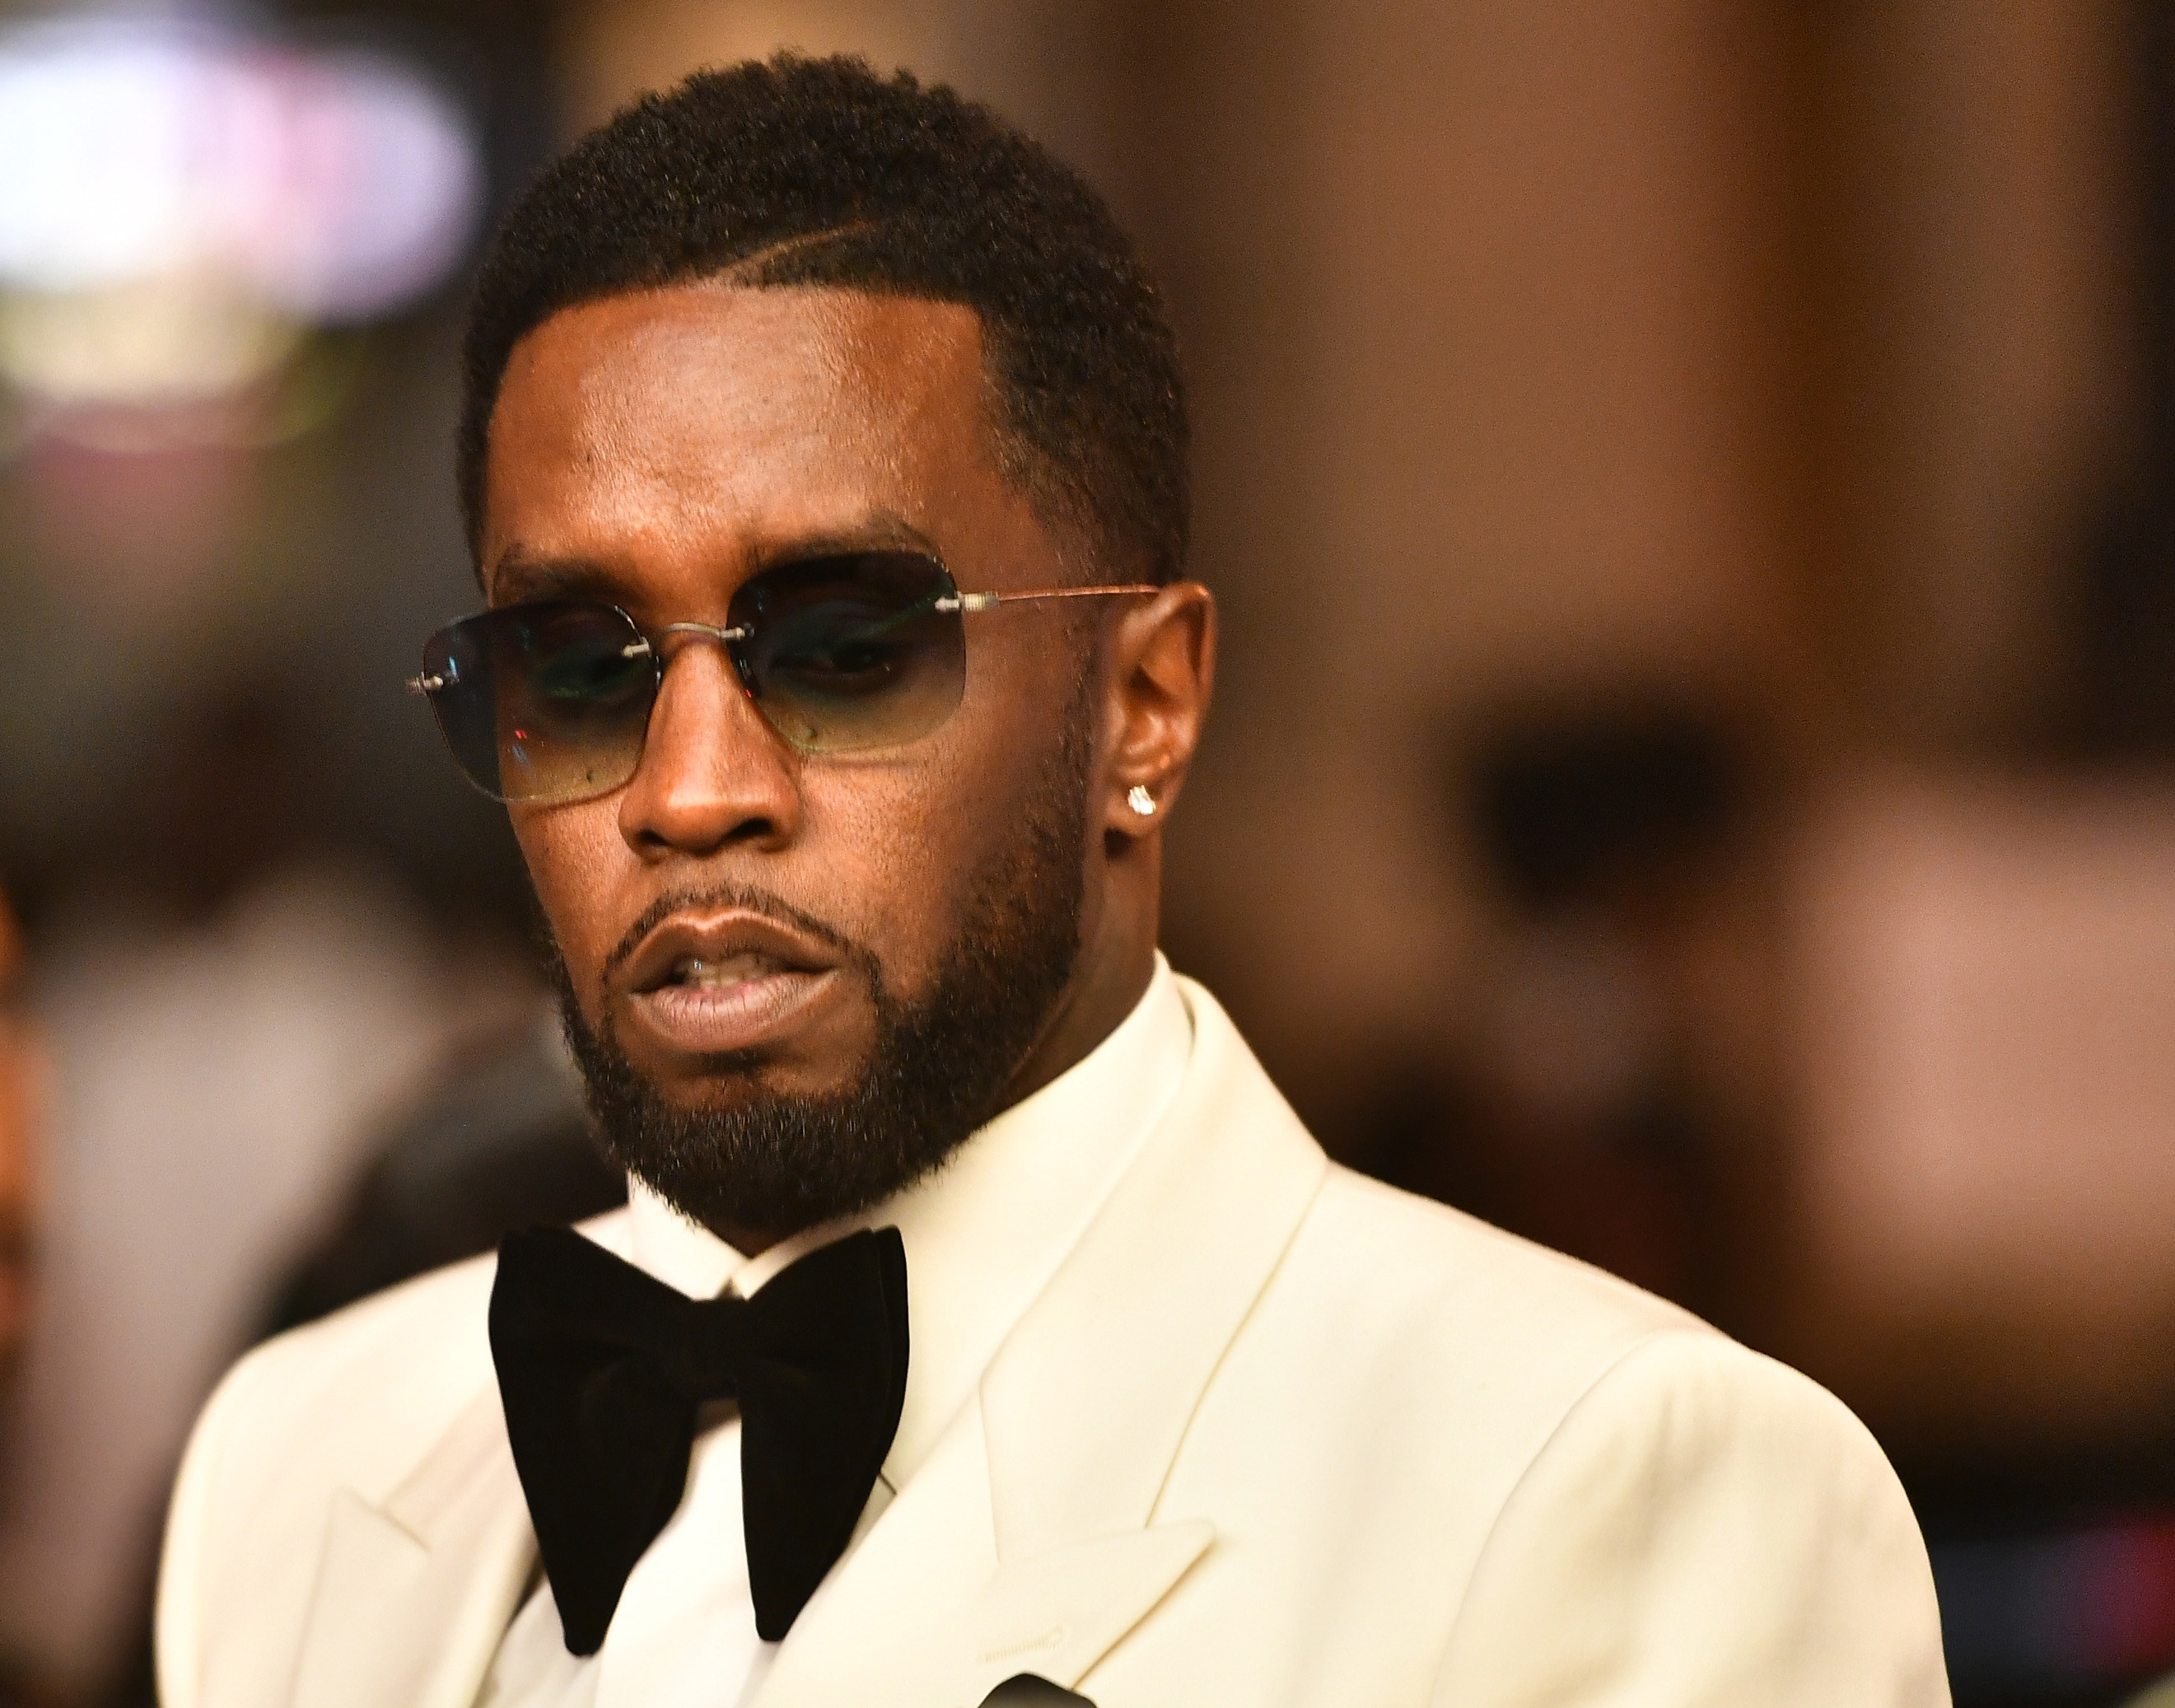 Diddy in sunglasses and a bow tie